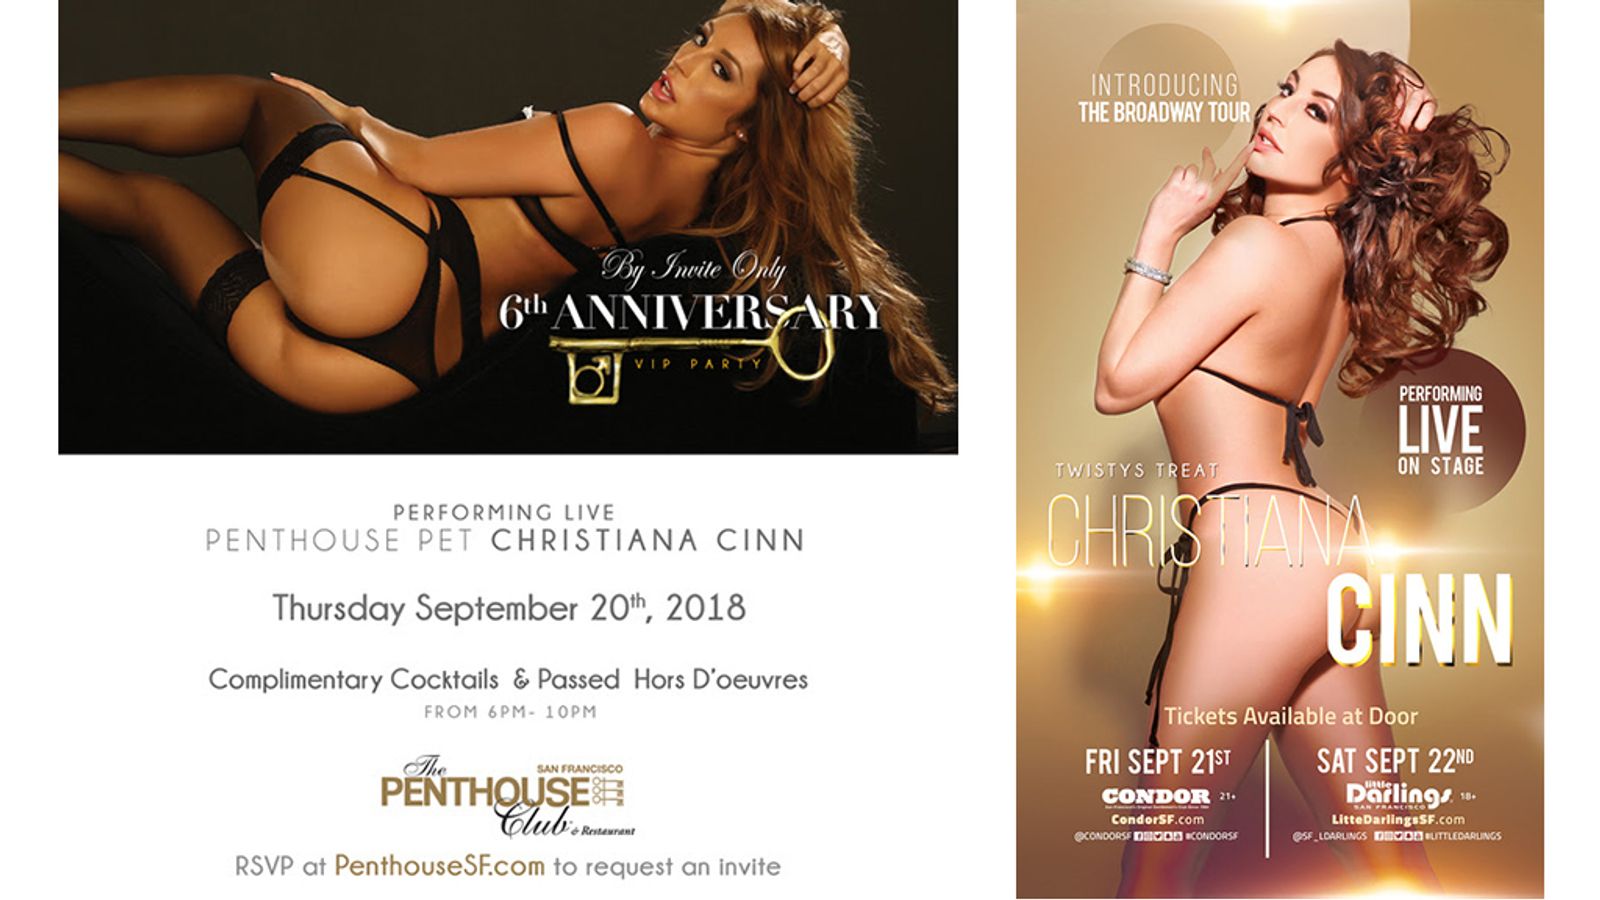 Christiana Cinn To Feature At 3 San Francisco Clubs This Weekend